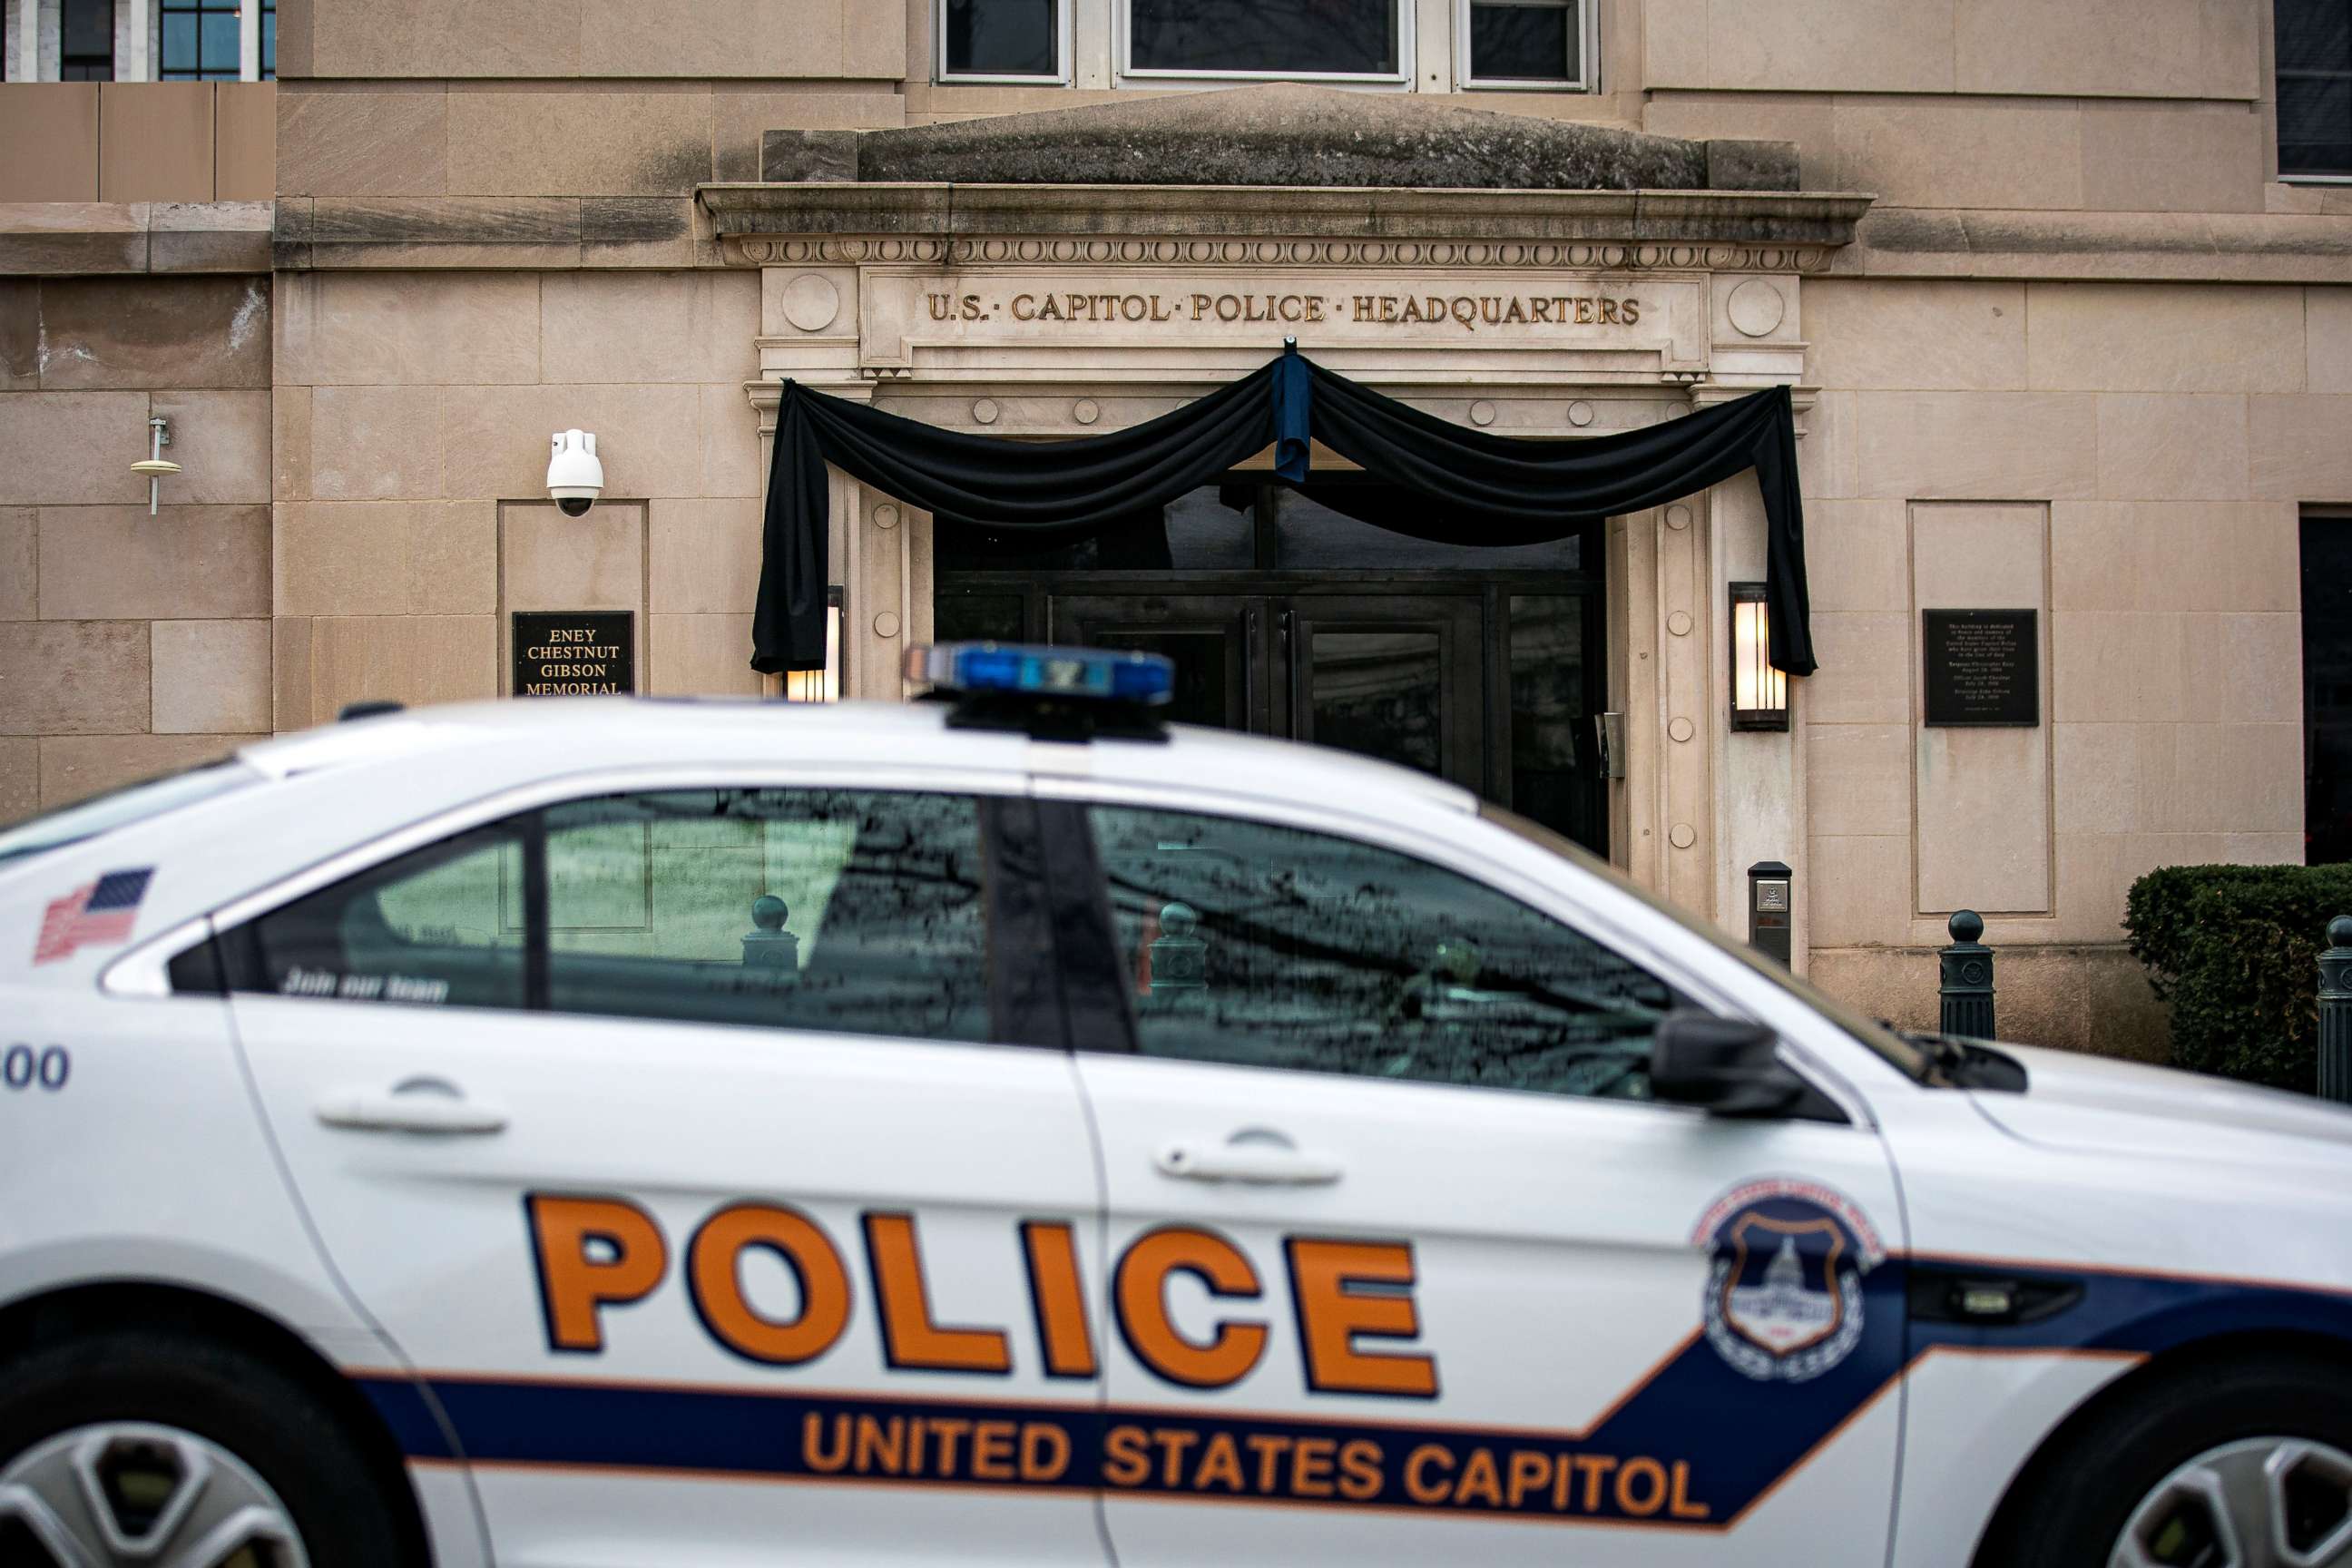 PHOTO: Black bunting is displayed at the entrance to the U.S. Capitol Police headquarters, following the death of U.S. Capitol Police Officer William Evans, who was killed on April 2, 2021. 